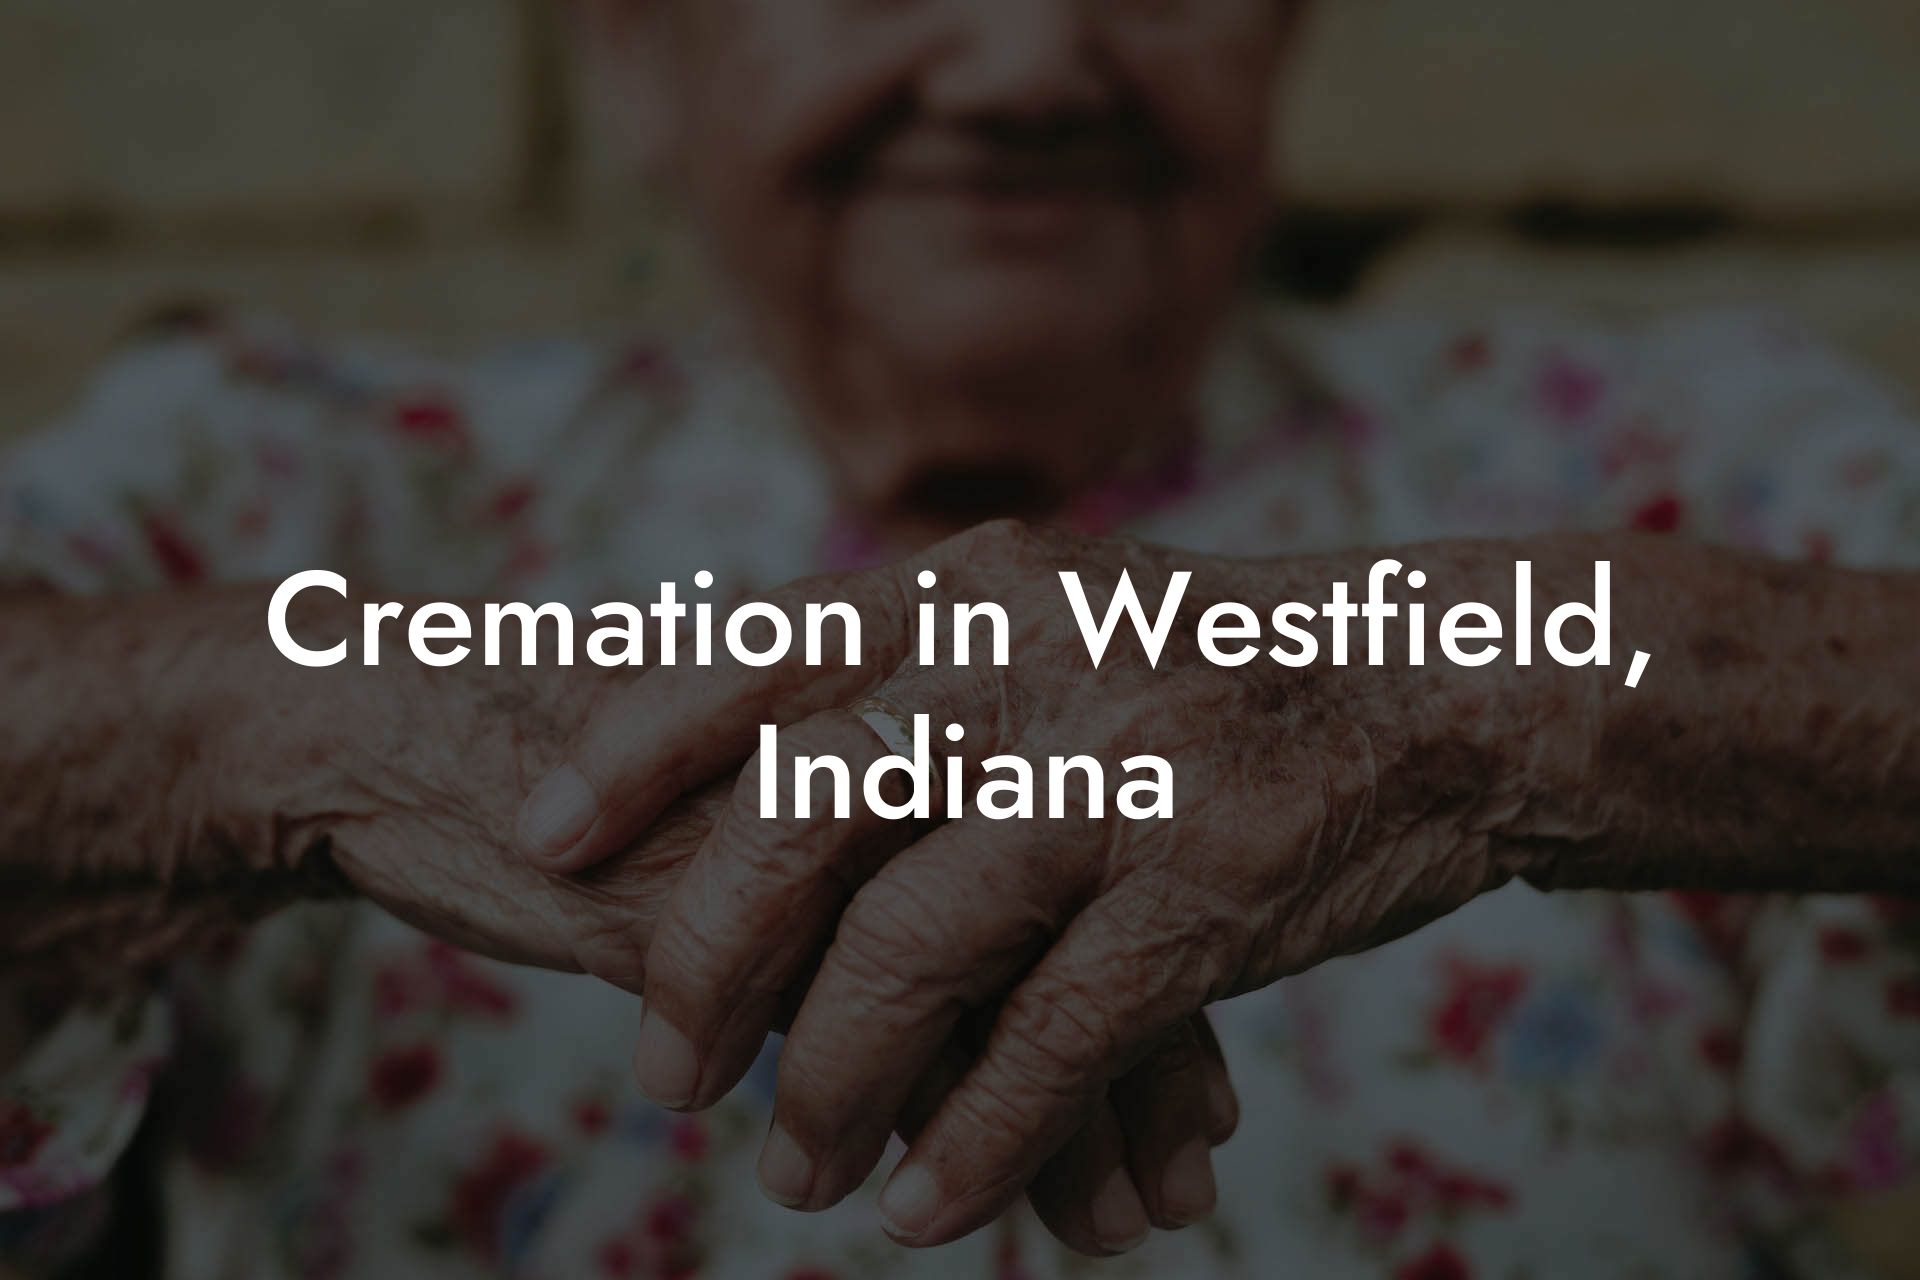 Cremation in Westfield, Indiana